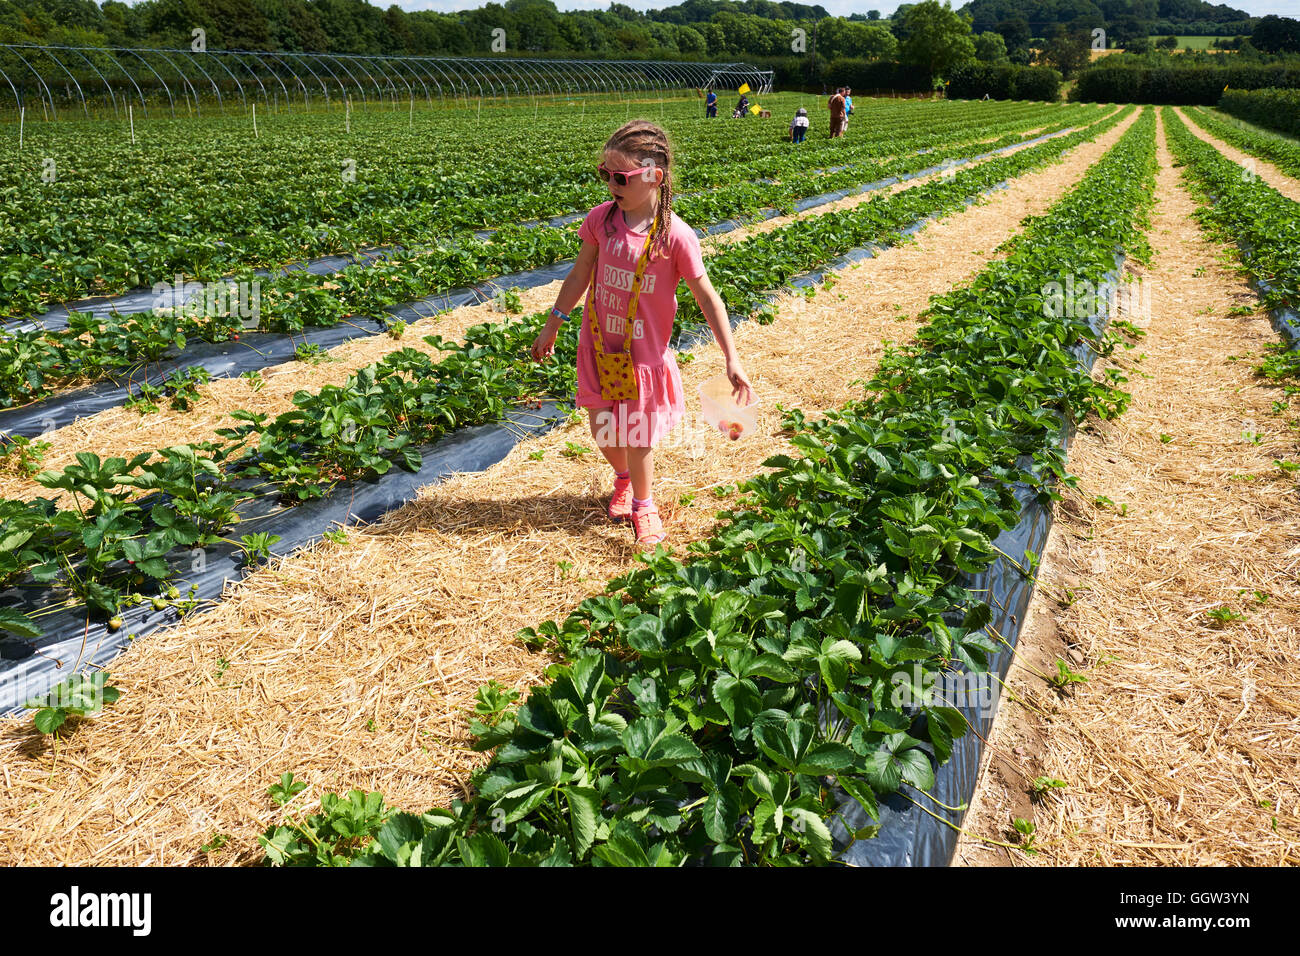 Young Girl Picking Strawberries At A Pick Your Own Soft Fruit Farm In Warwickshire UK Stock Photo